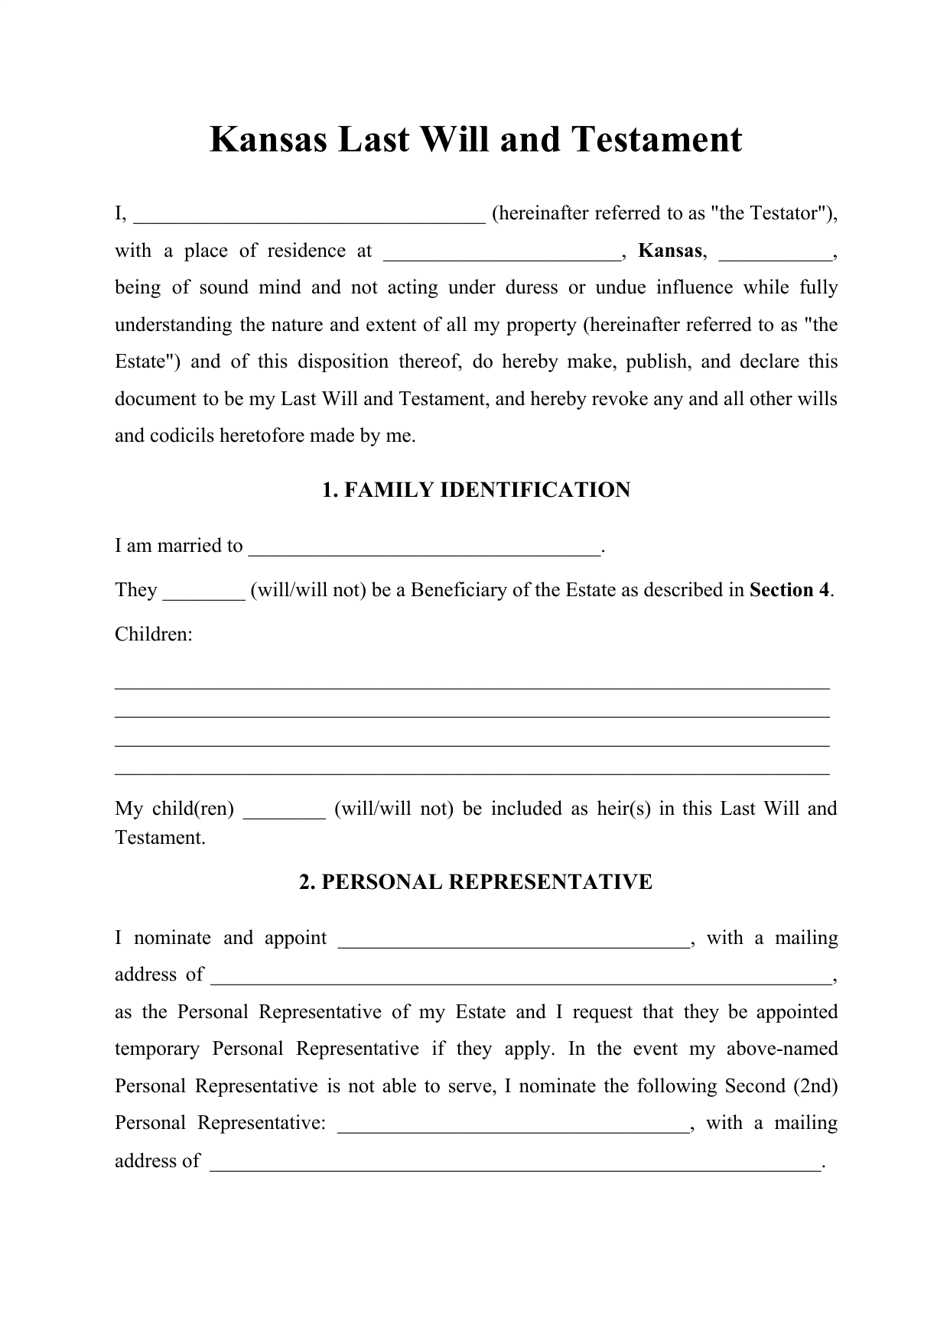 Last Will and Testament Template - Kansas